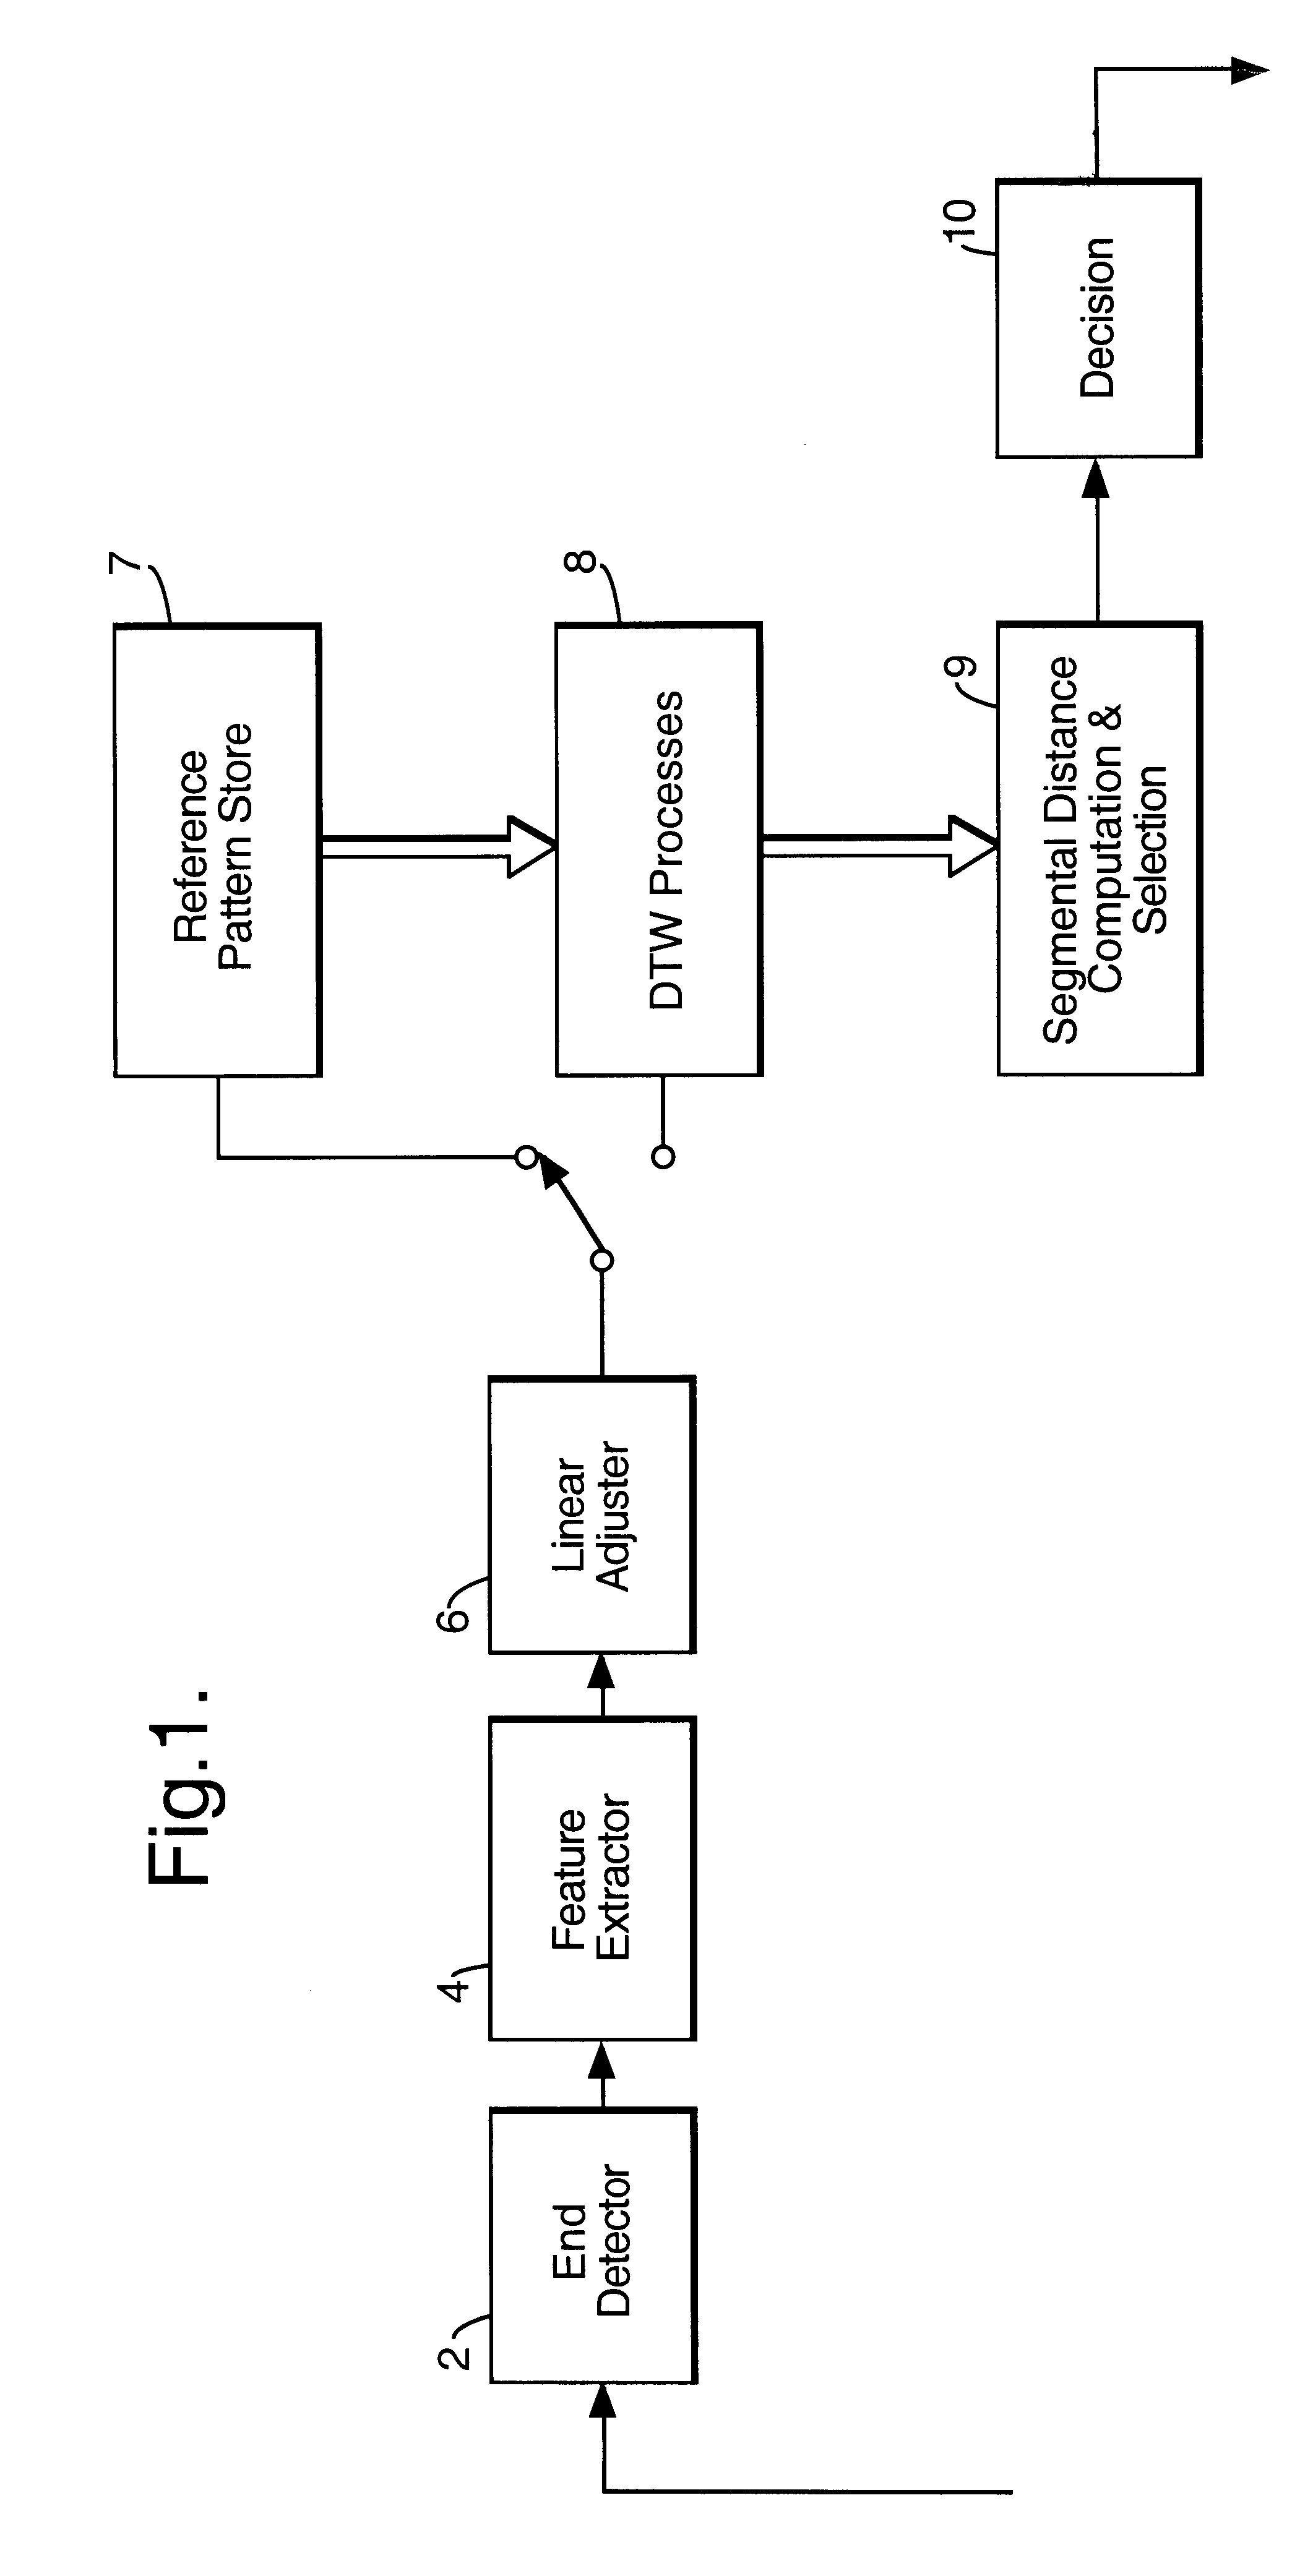 Method and apparatus for speaker recognition via comparing an unknown input to reference data